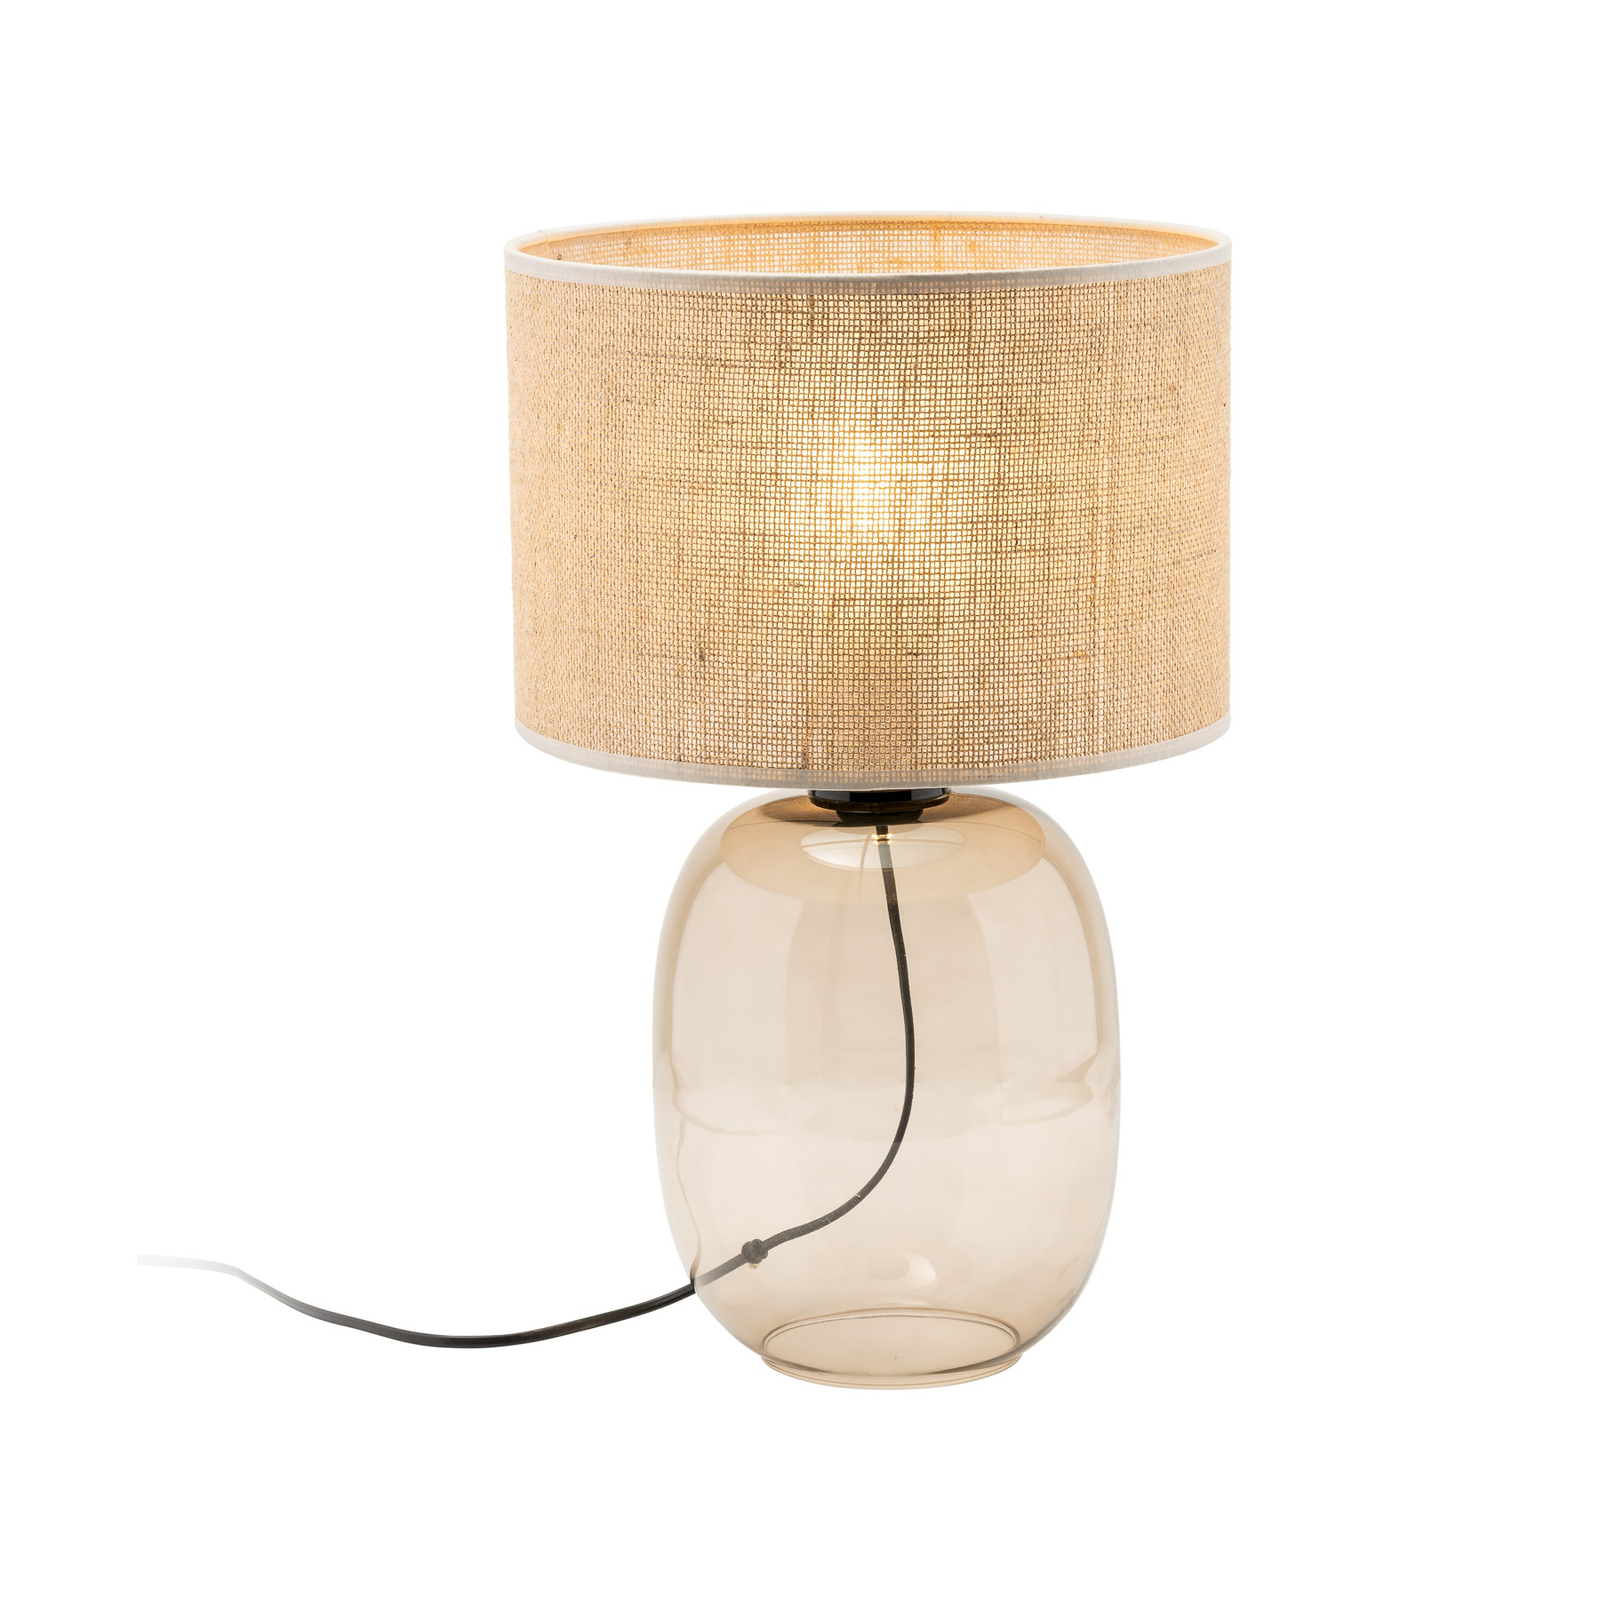 Melody table lamp, height 48 cm, brown glass, natural jute